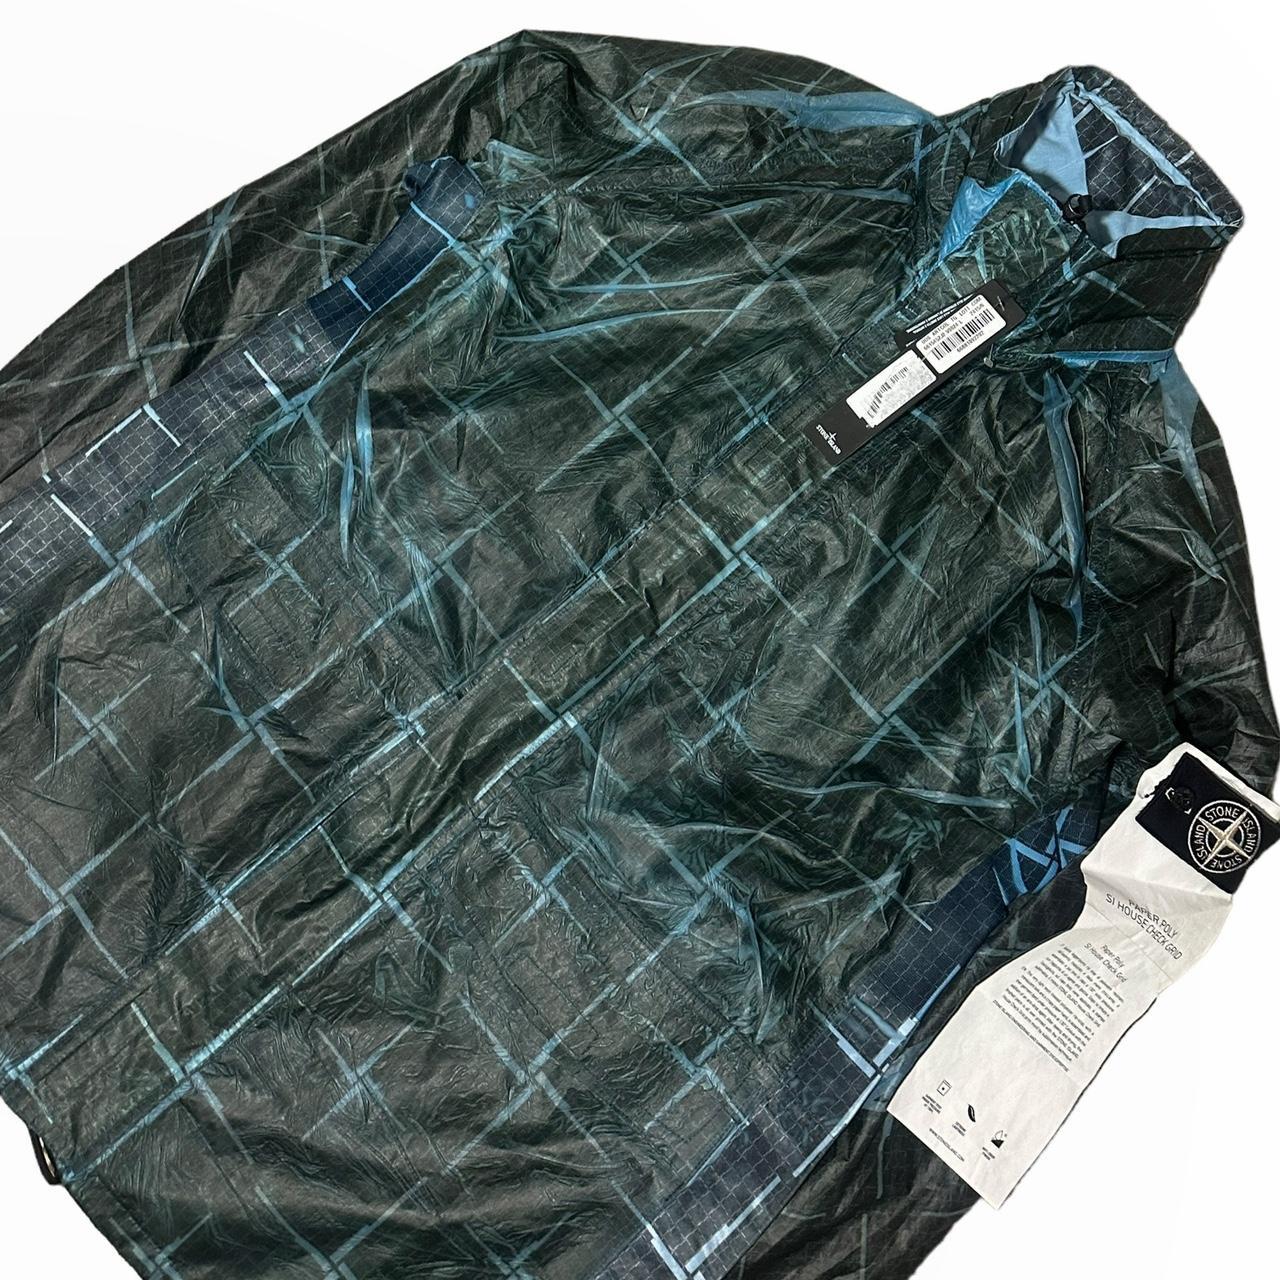 Stone Island Paper Poly House Check Grid Zip Up Jacket